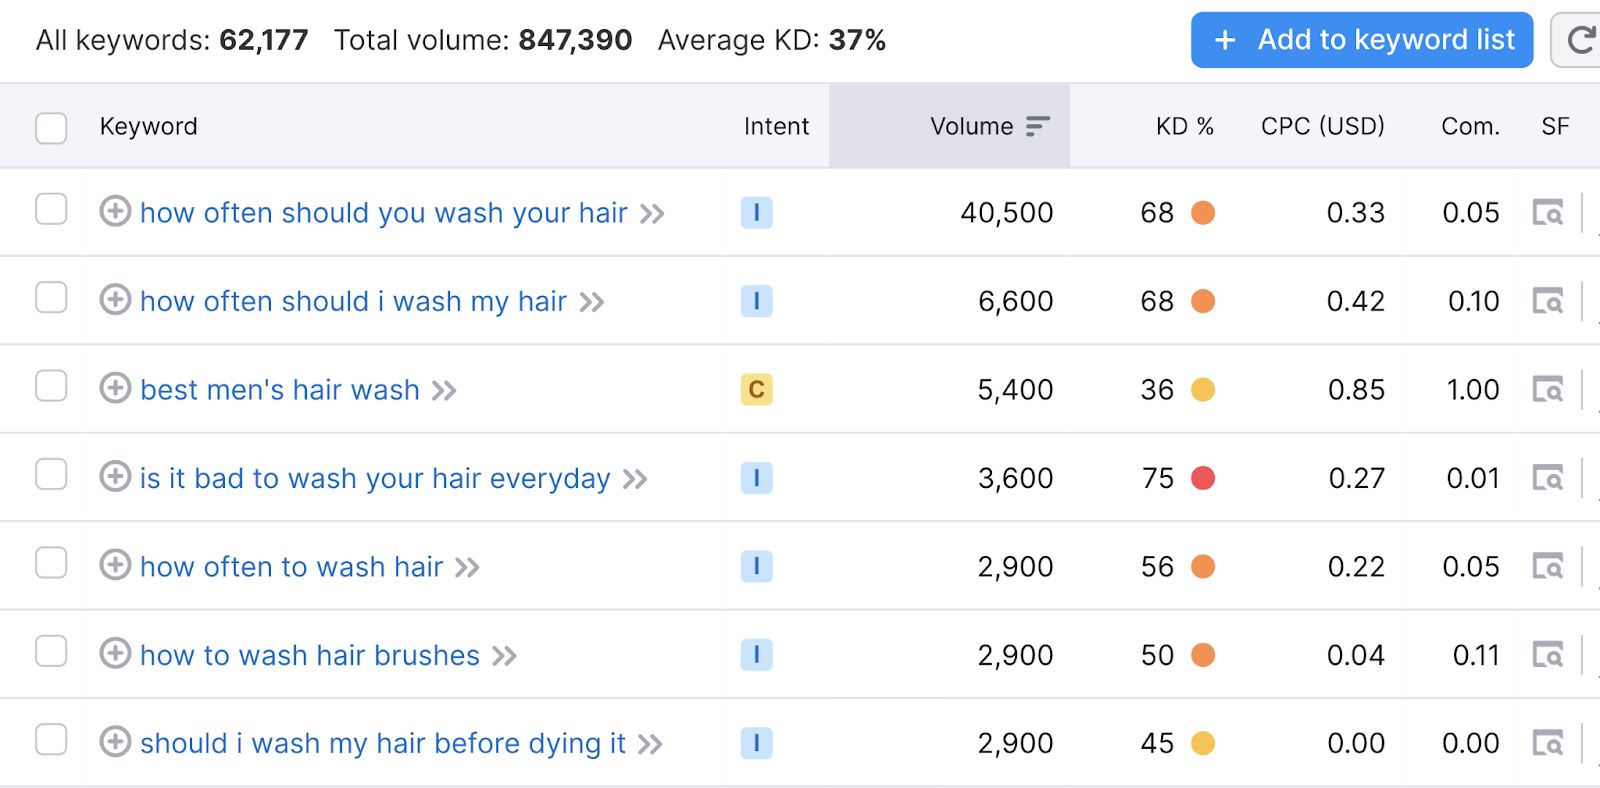 long-tail keywords include how often should you wash your hair, how to wash hair brushes, is it bad to wash your hair everyday etc.